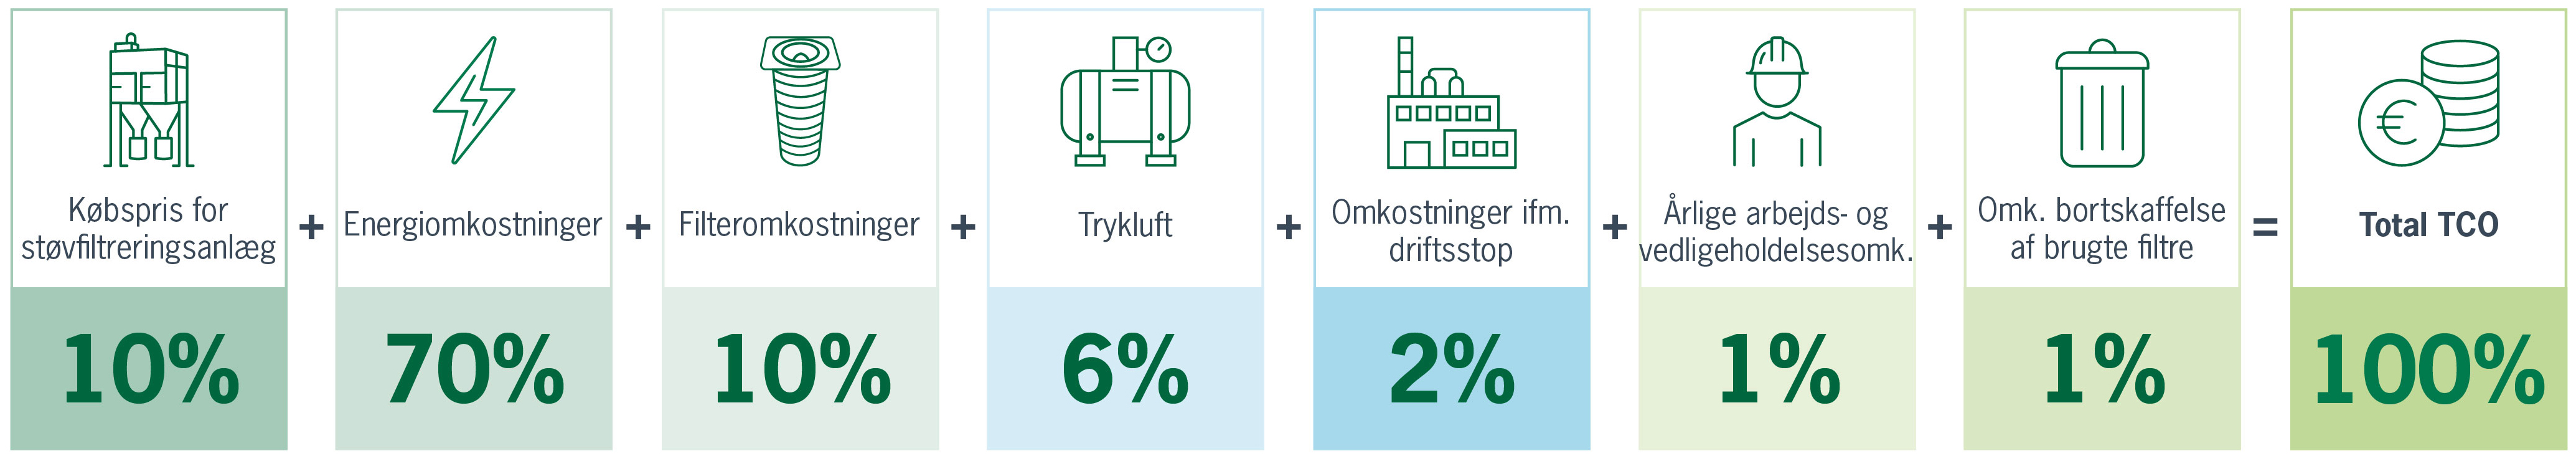 Cost split purchase price dust collector & operational cost - in Danish